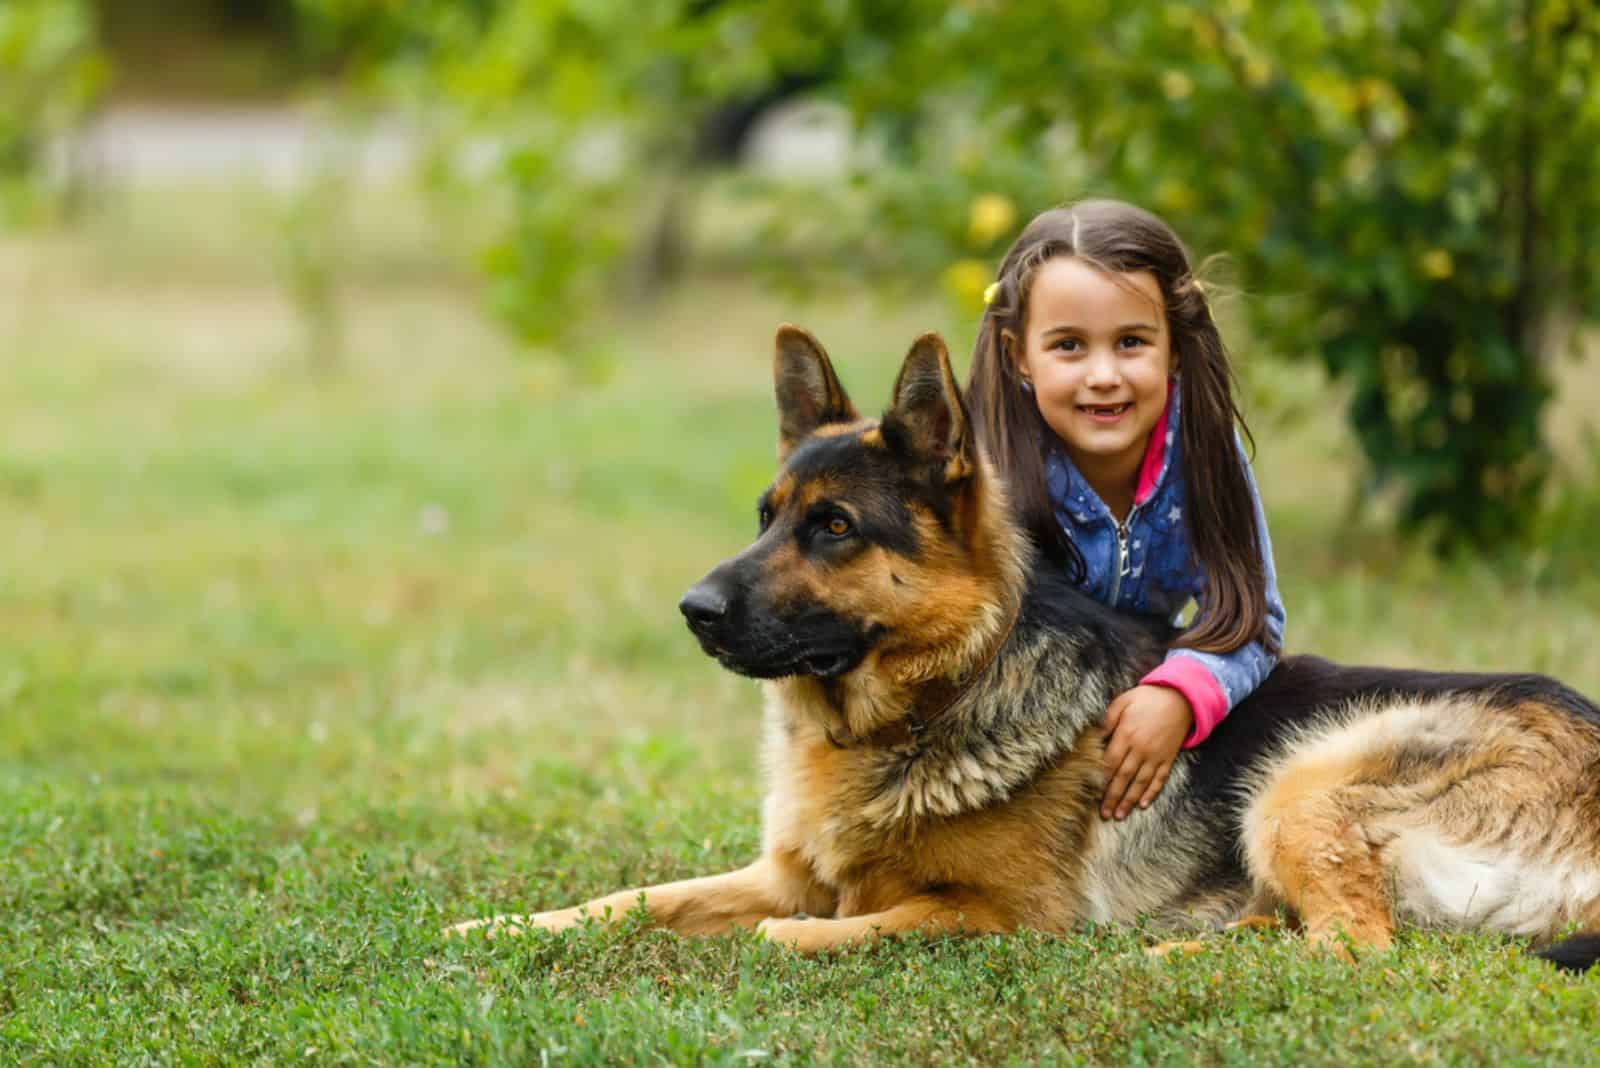 9 Benefits Of Having A German Shepherd: Let’s Find Out